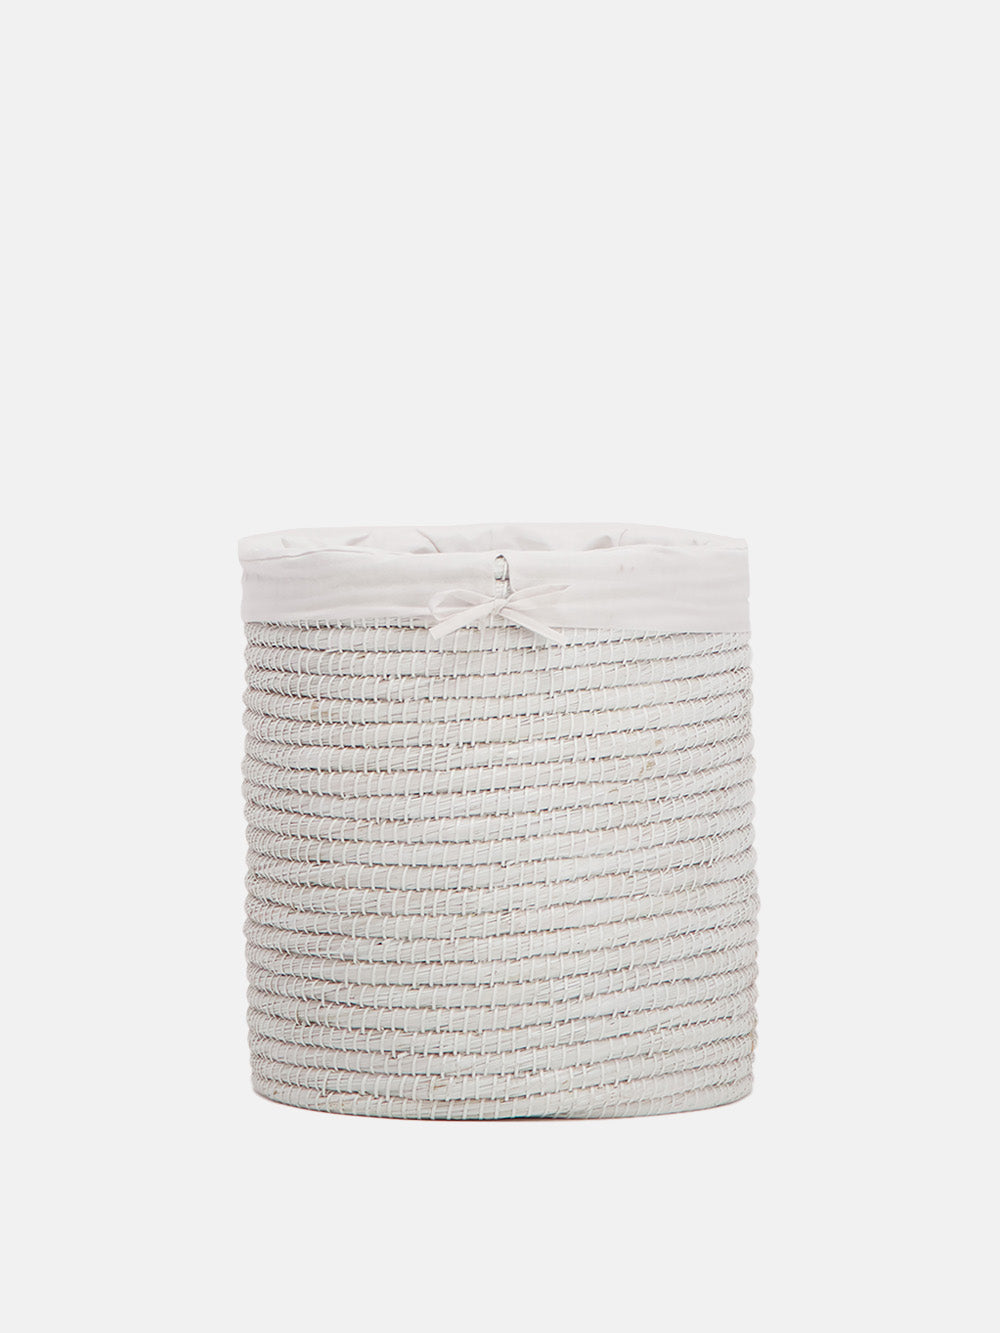 See Grass Woven Laundry Hamper with Liner (L)